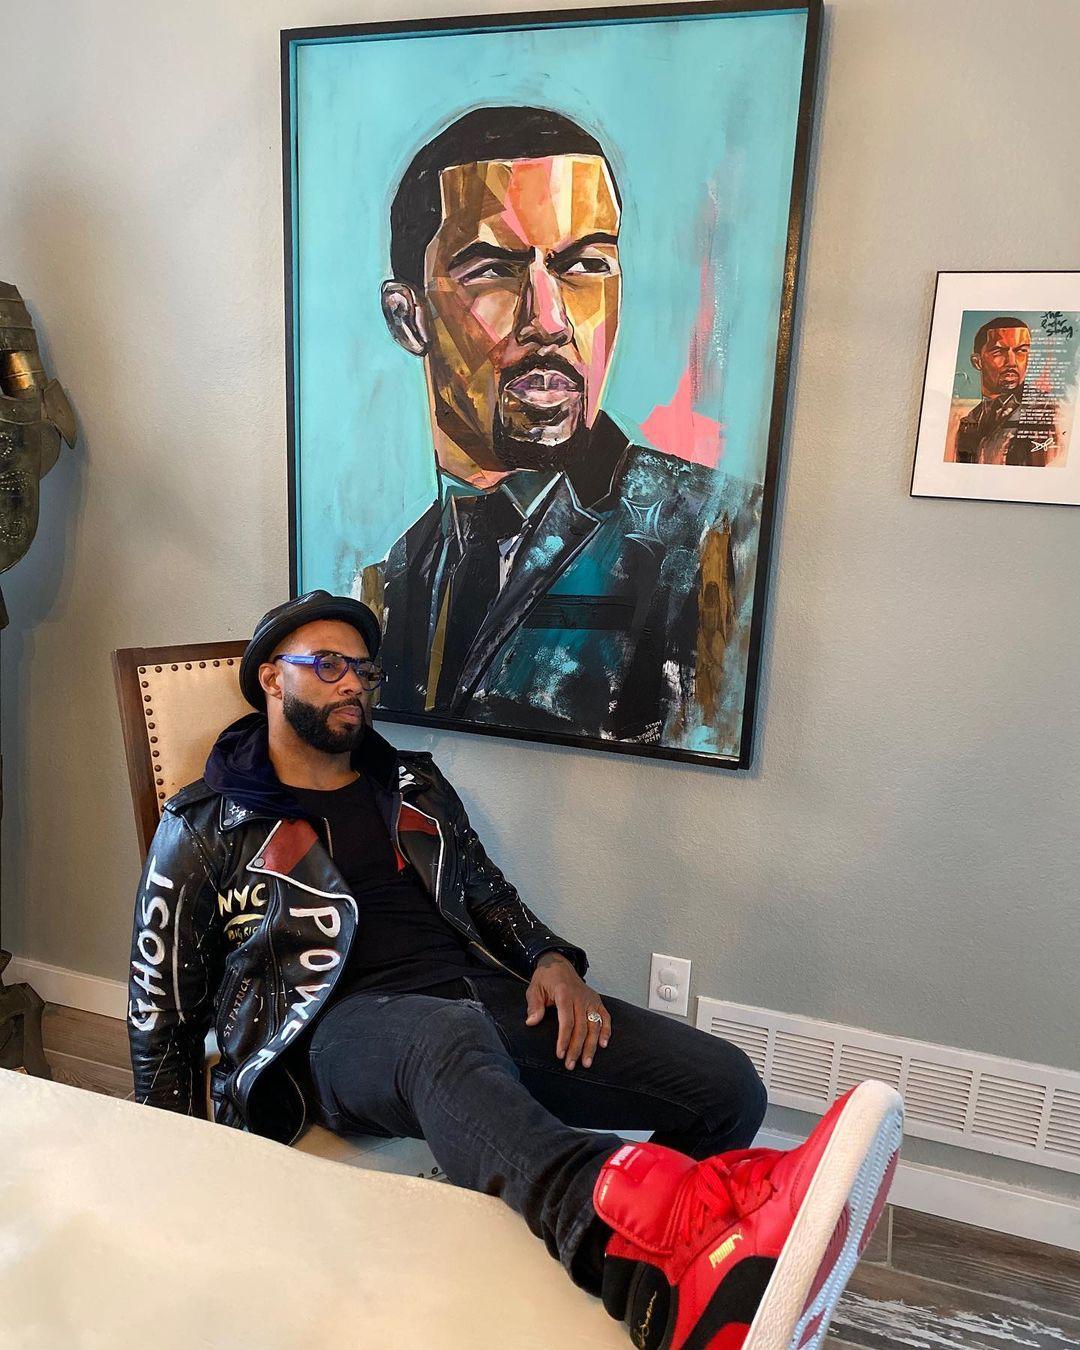 A photo showing Omari Hardwick sitting beside a drawn portrait on him hanging on the wall.